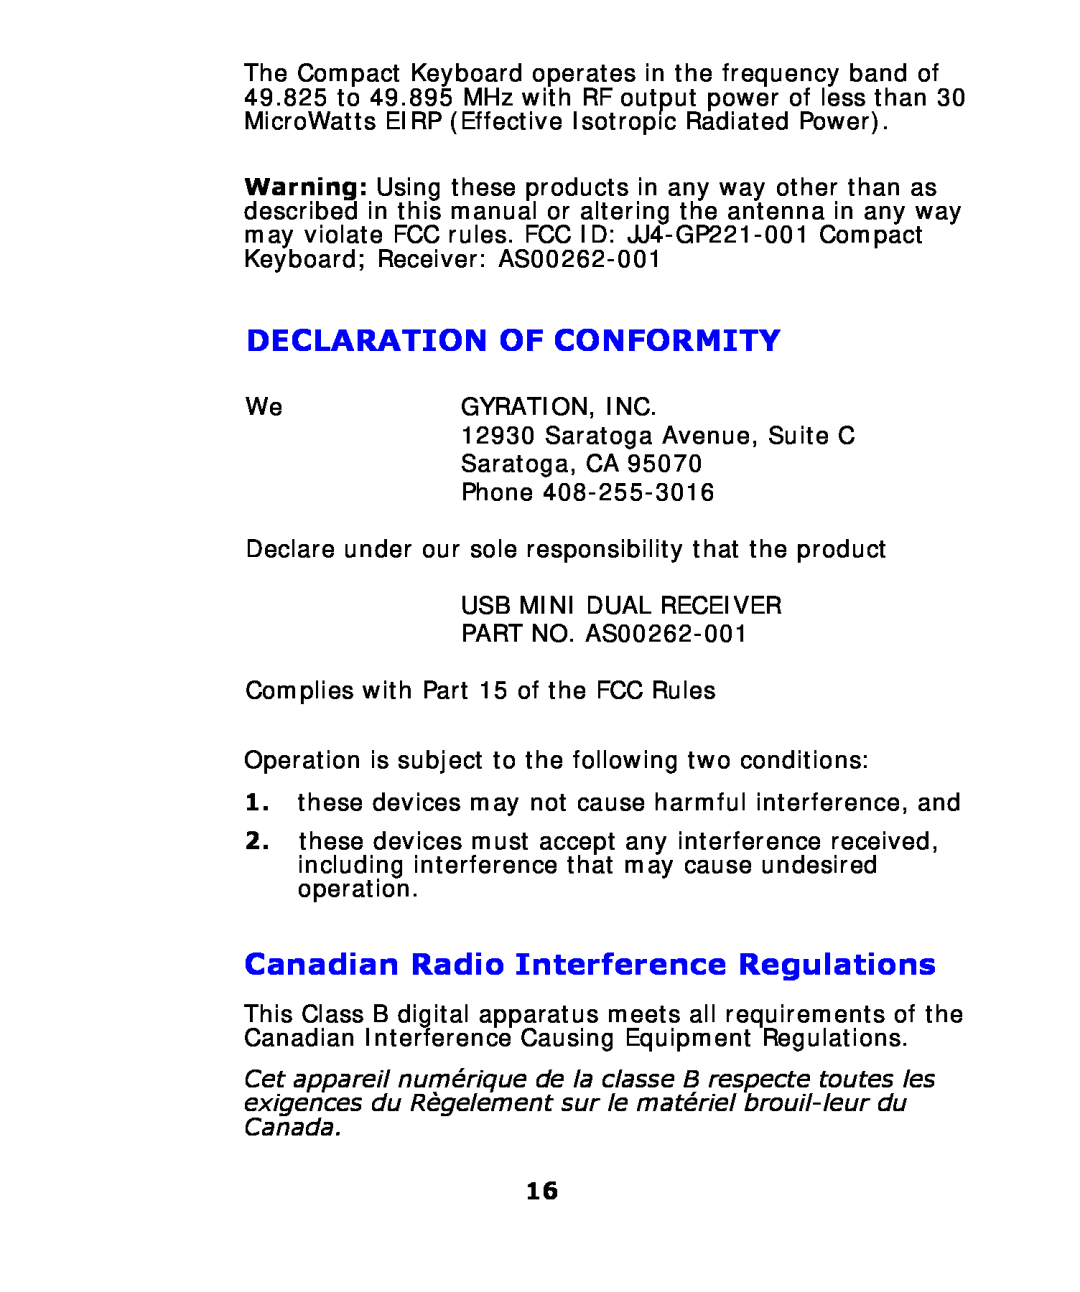 Gyration Ultra Cordless Optical Mouse user manual Declaration Of Conformity, Canadian Radio Interference Regulations 